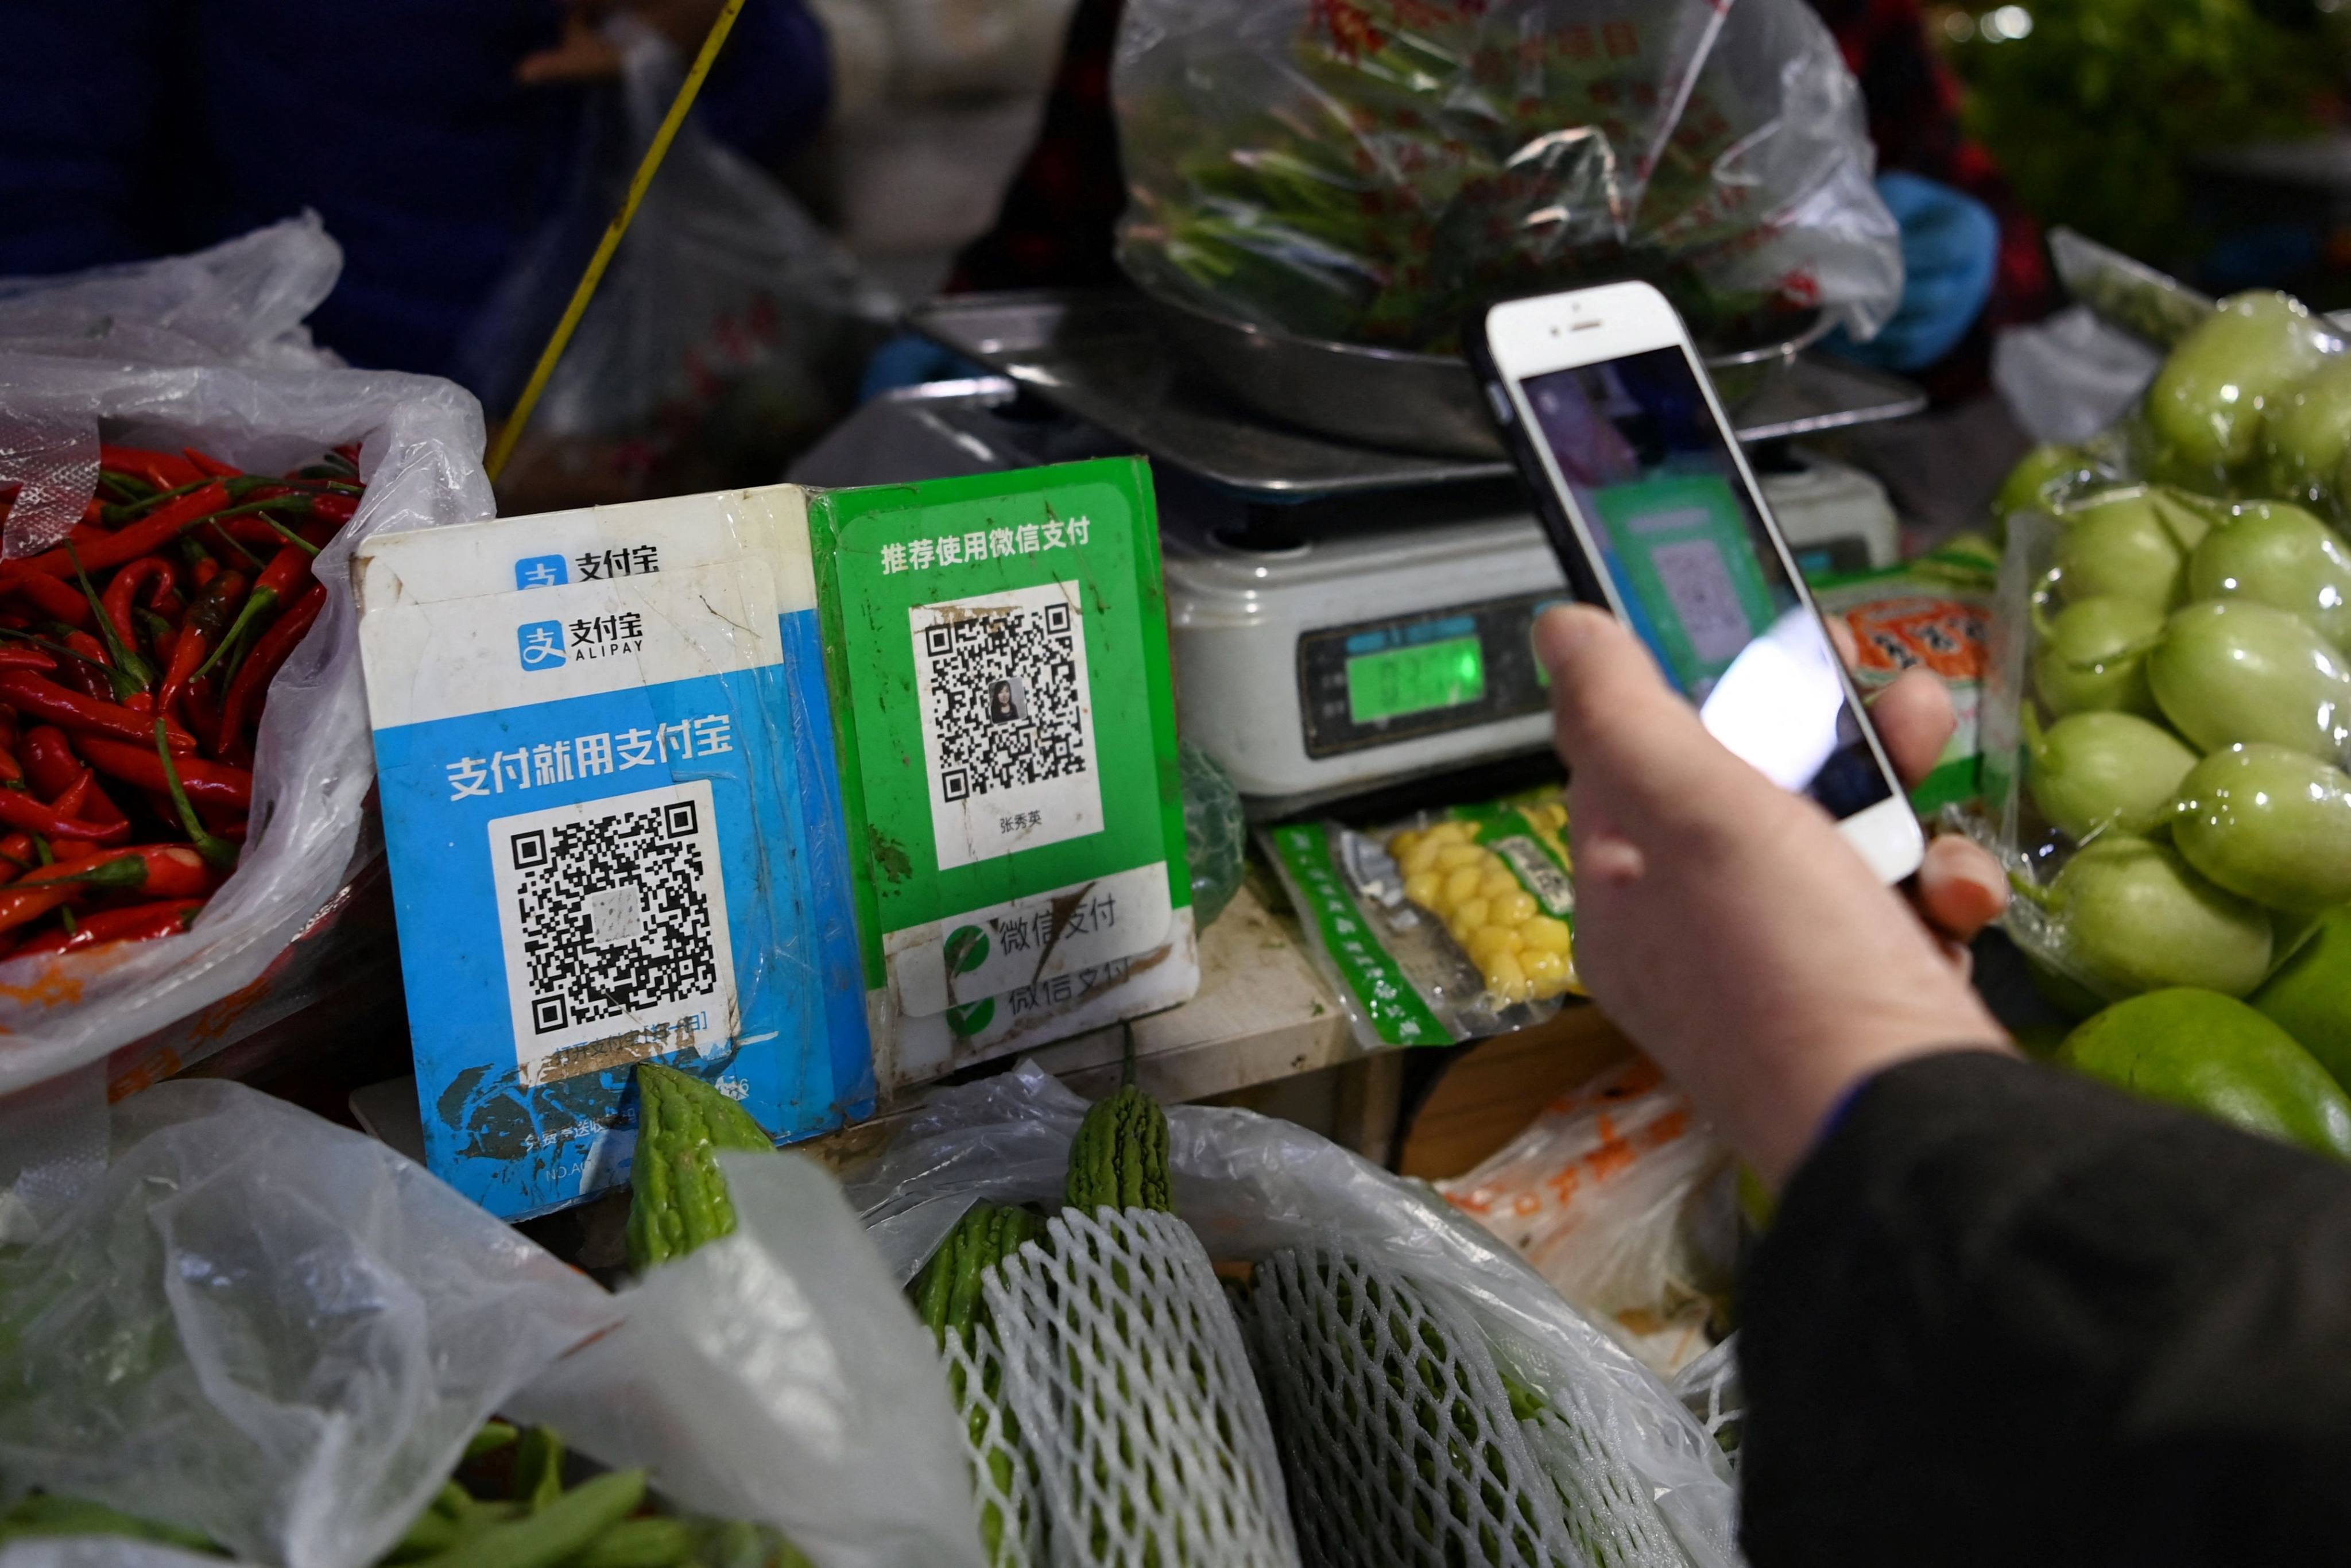 A customer buys produce using a WeChat QR payment code with her smartphone next to an Alipay QR code in Beijing on November 3, 2020. Photo: AFP